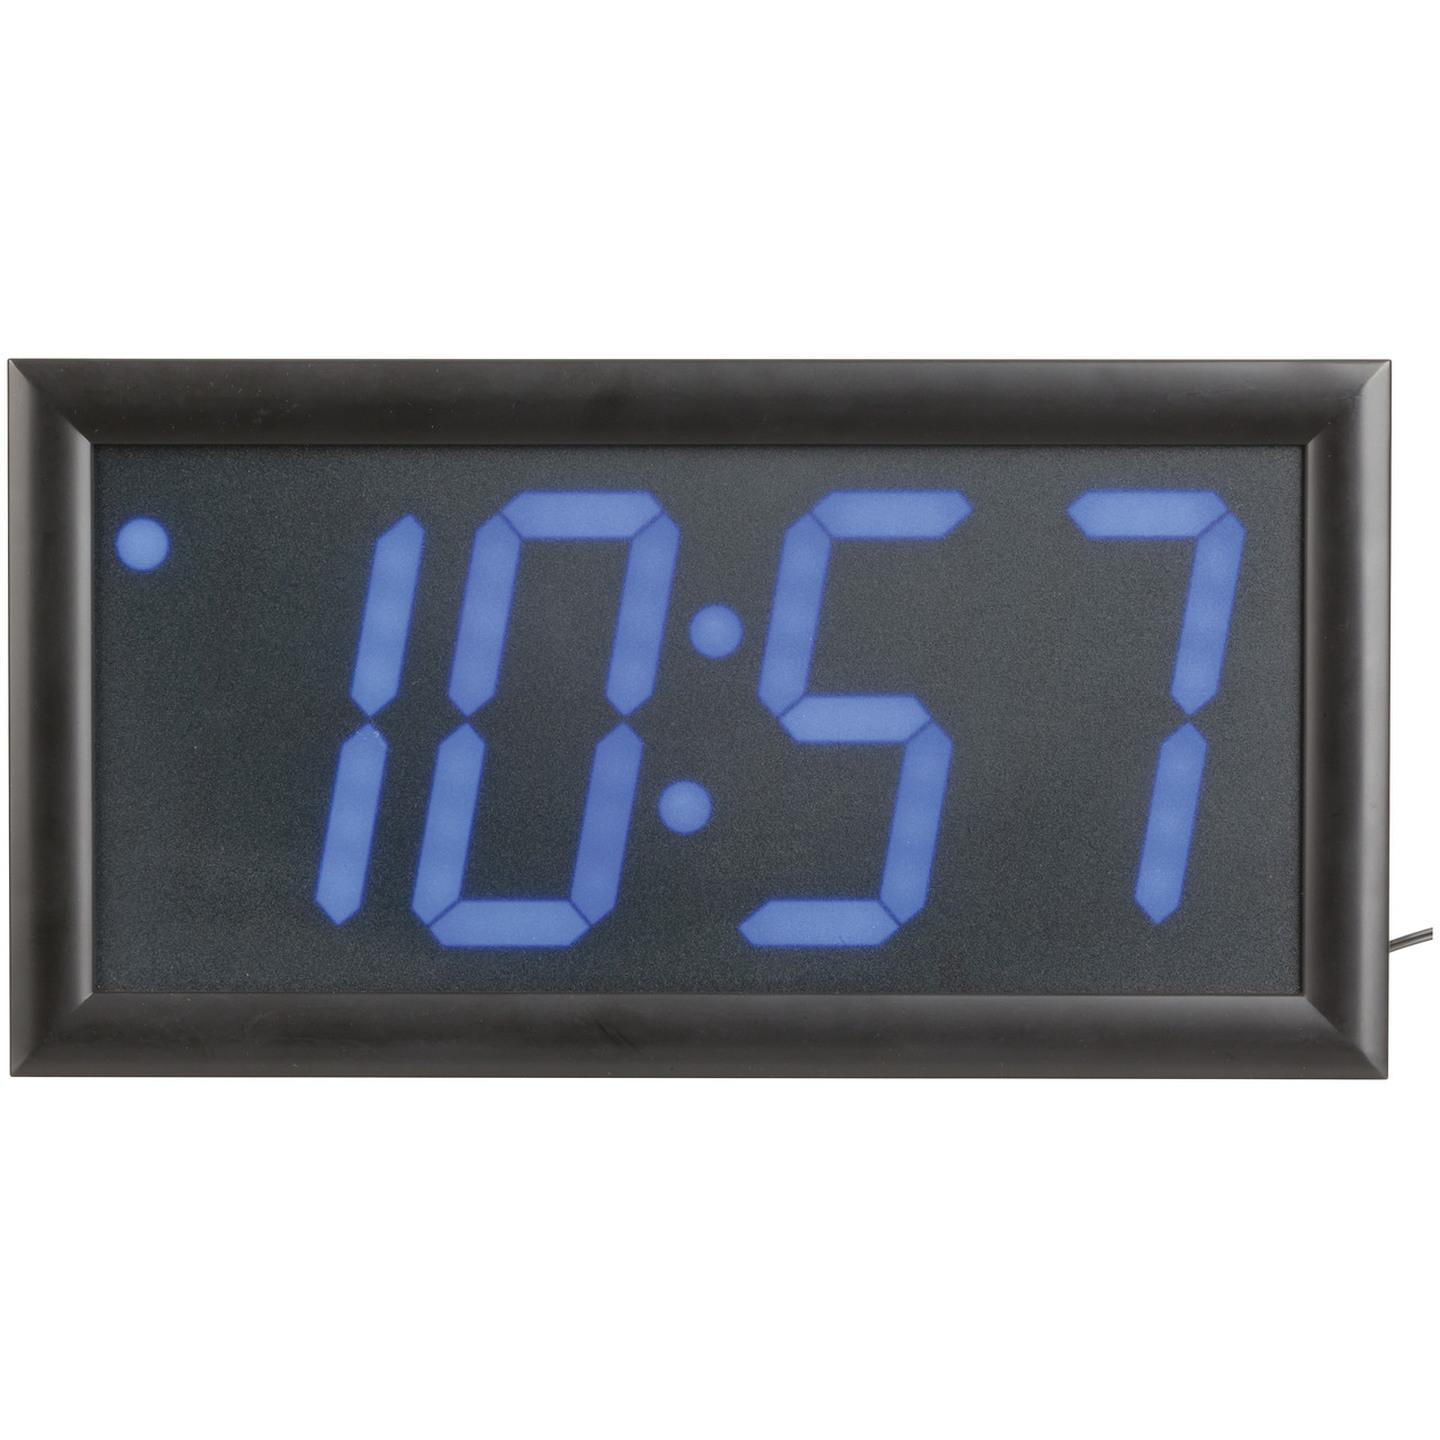 LED Wall Clock with Calendar and Temperature Display